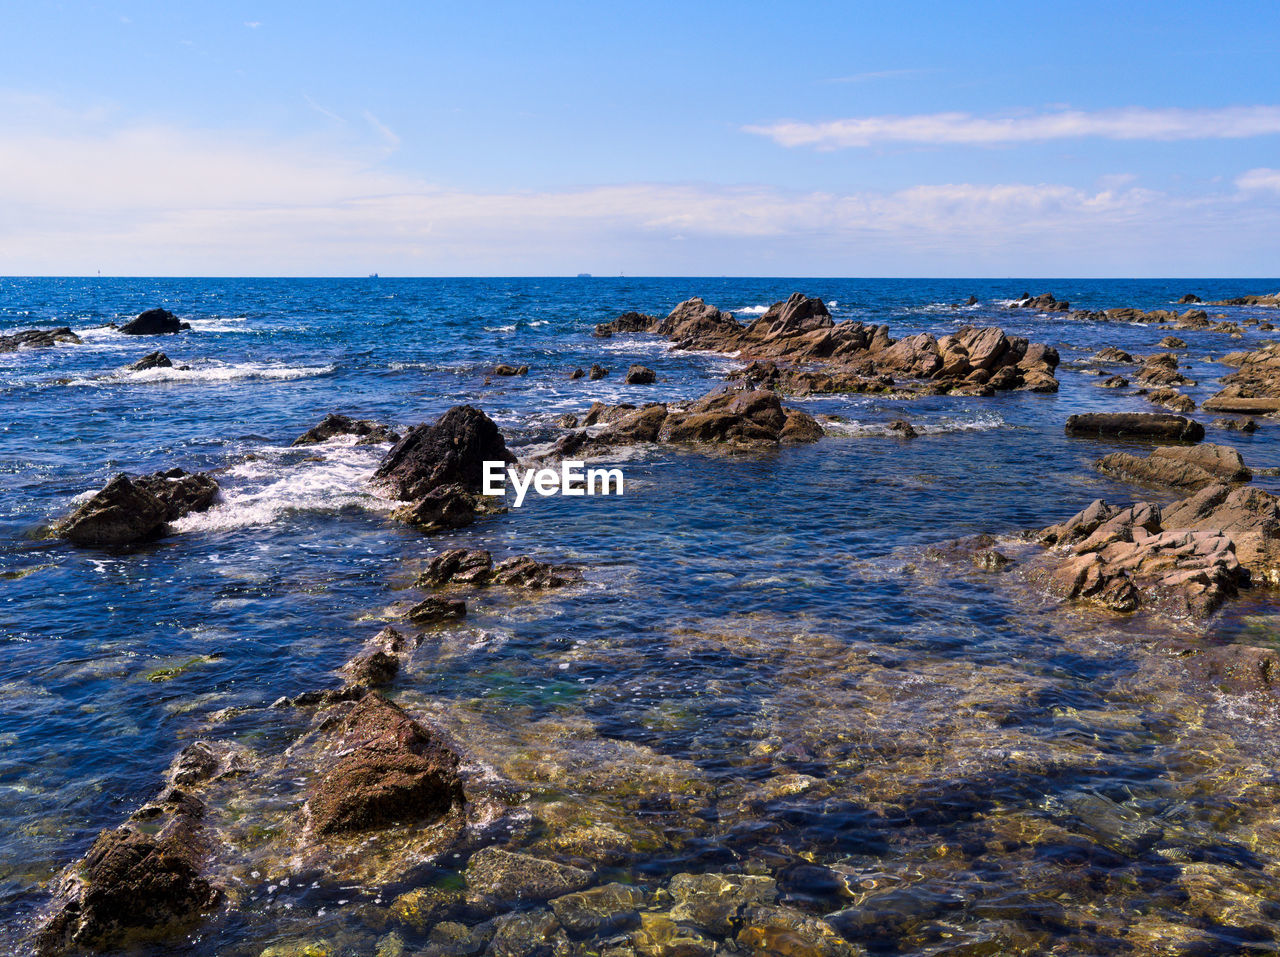 SCENIC VIEW OF ROCKS ON SEA AGAINST SKY